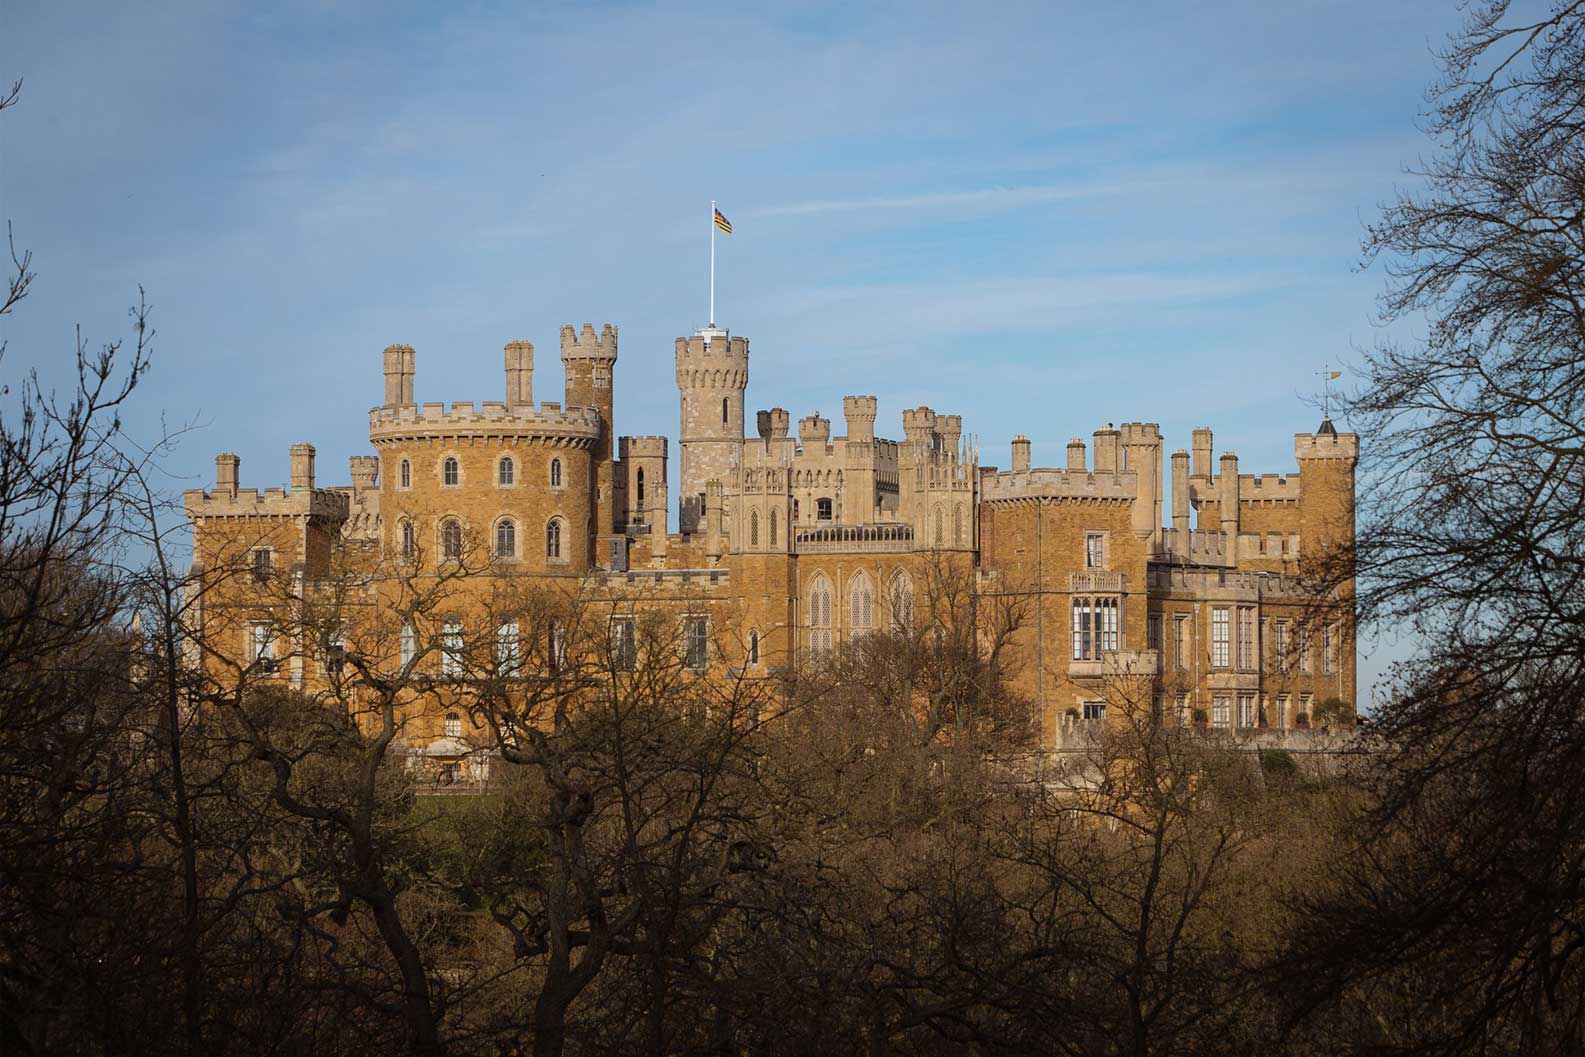 Exterior of Belvoir Castle with trees in the foreground